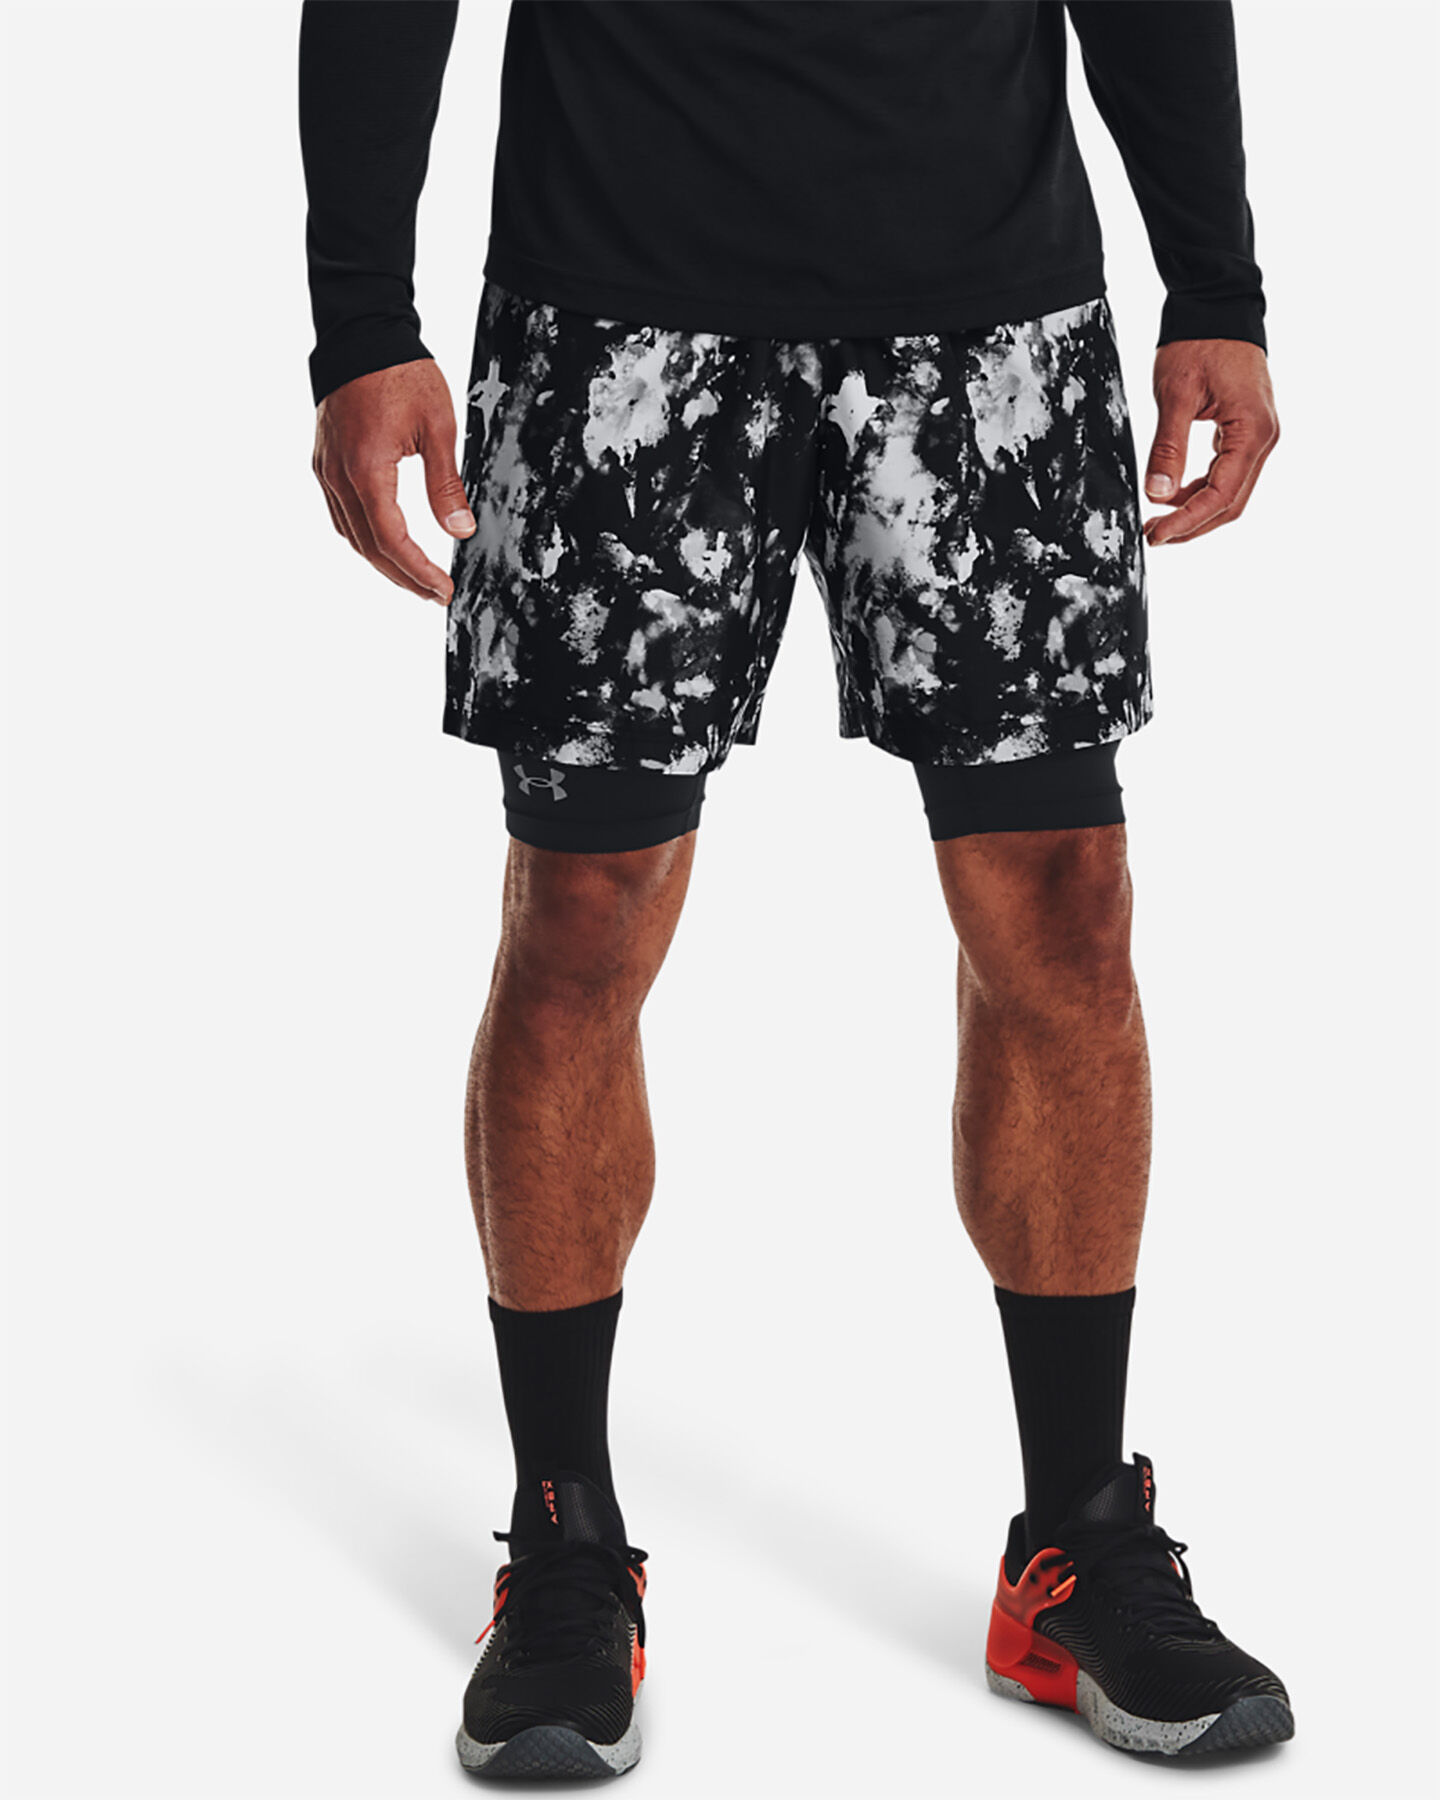  Pantalone training UNDER ARMOUR WOVEN ADAPT M S5331855|0002|SM scatto 2